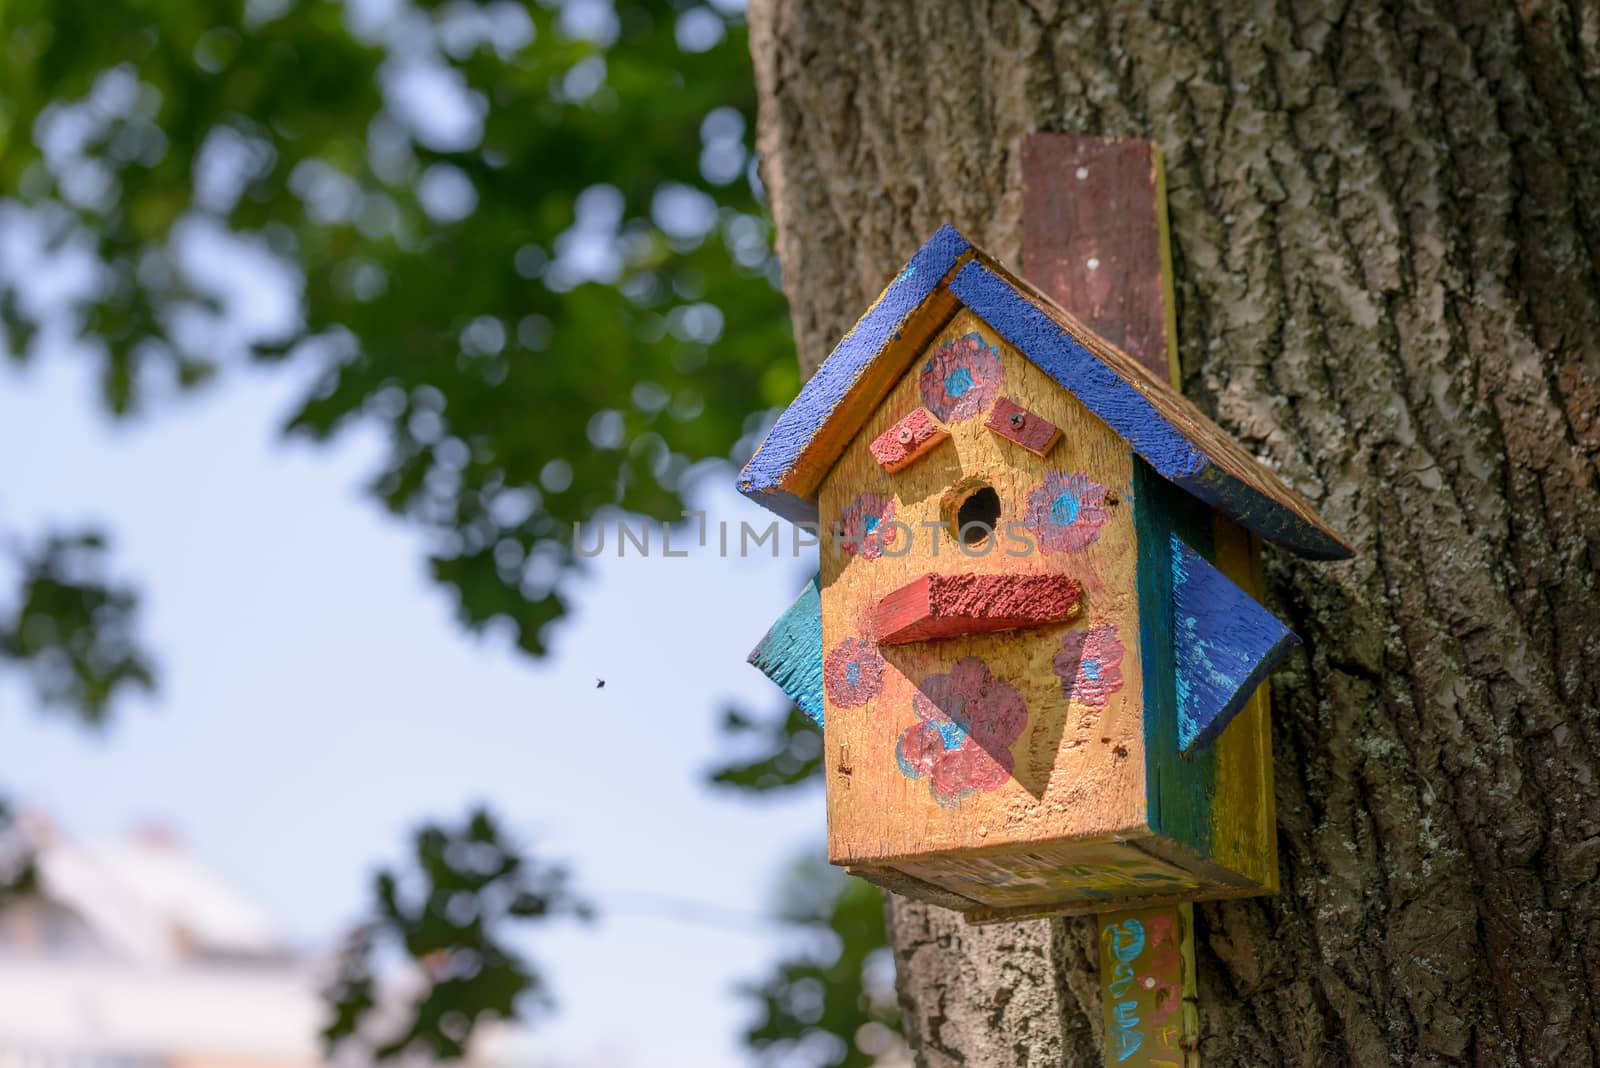 Handwork bird shelter made of chipboard and zinc in the woods during spring